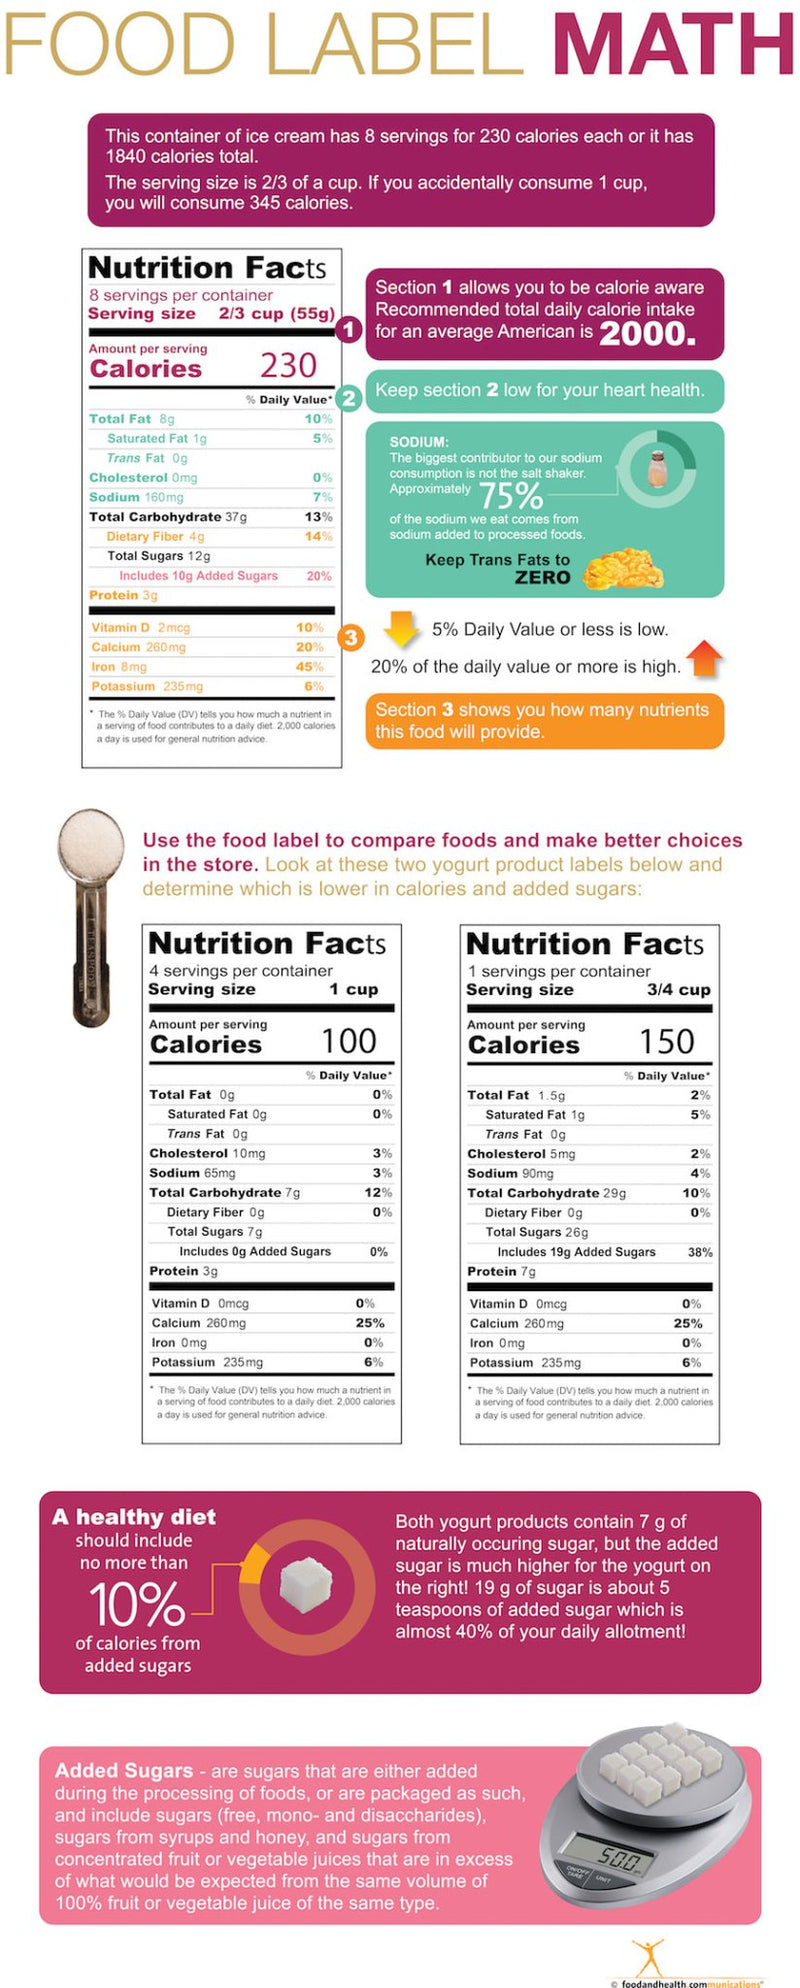 Custom Food Label Math Banner on Banner Stand 24" x 62" - Add Your Logo To This Health Fair Banner - Nutrition Education Store